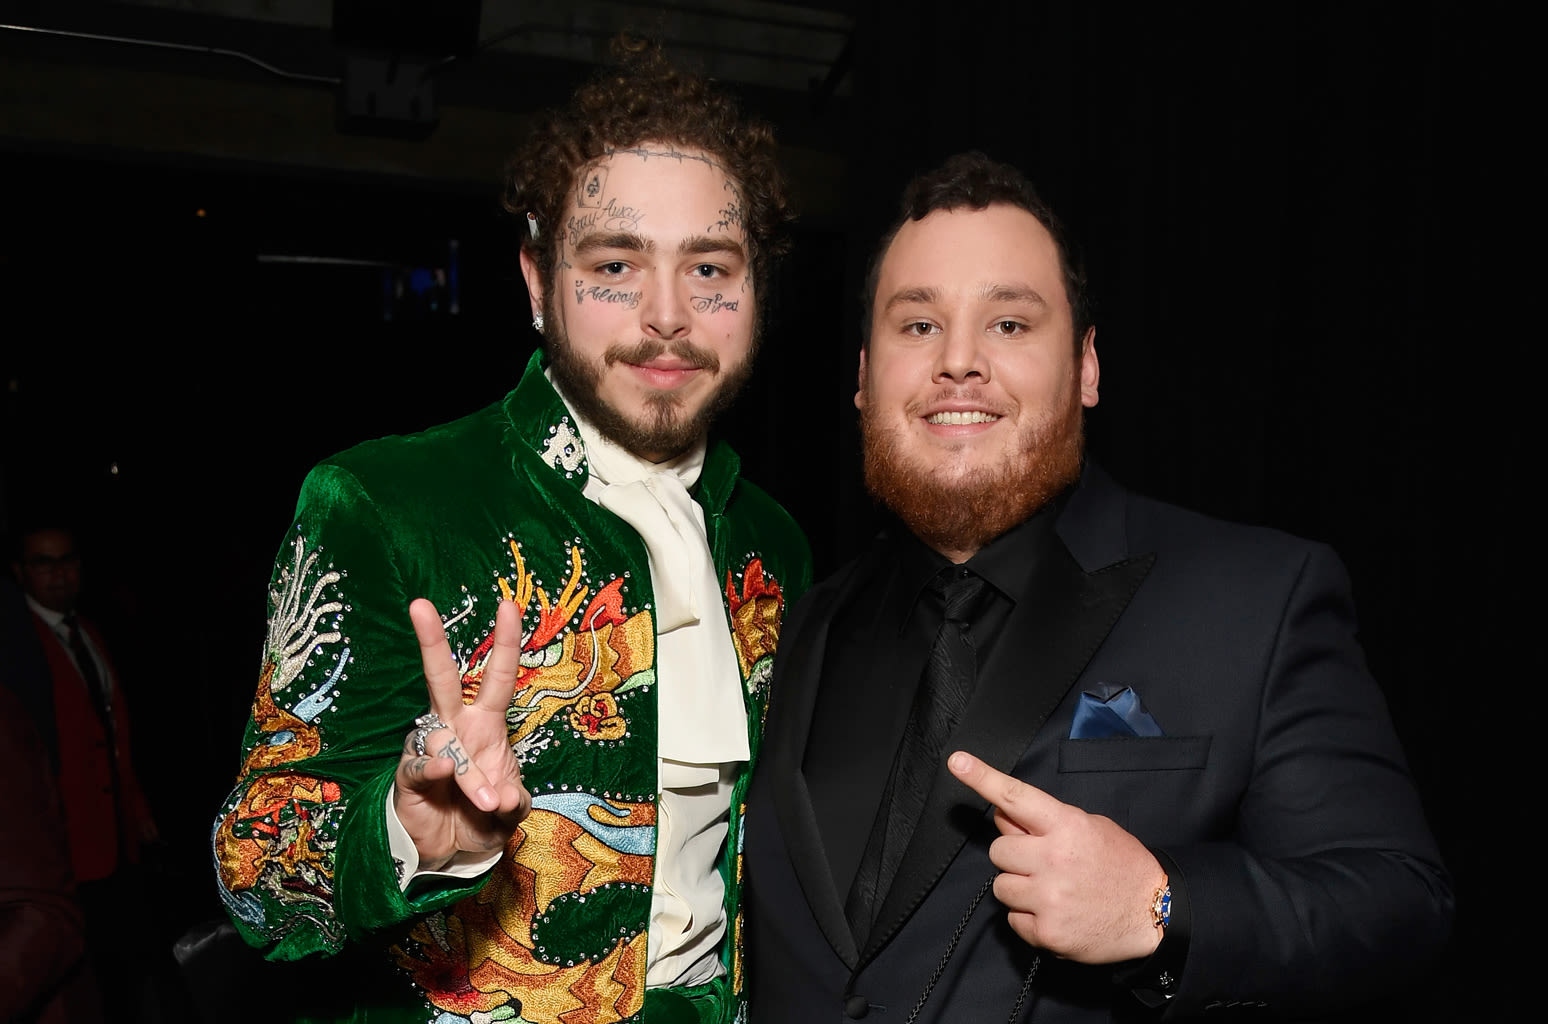 7 Must-Hear New Country Songs: Post Malone, Luke Combs, Wyatt Flores, The Castellows & More